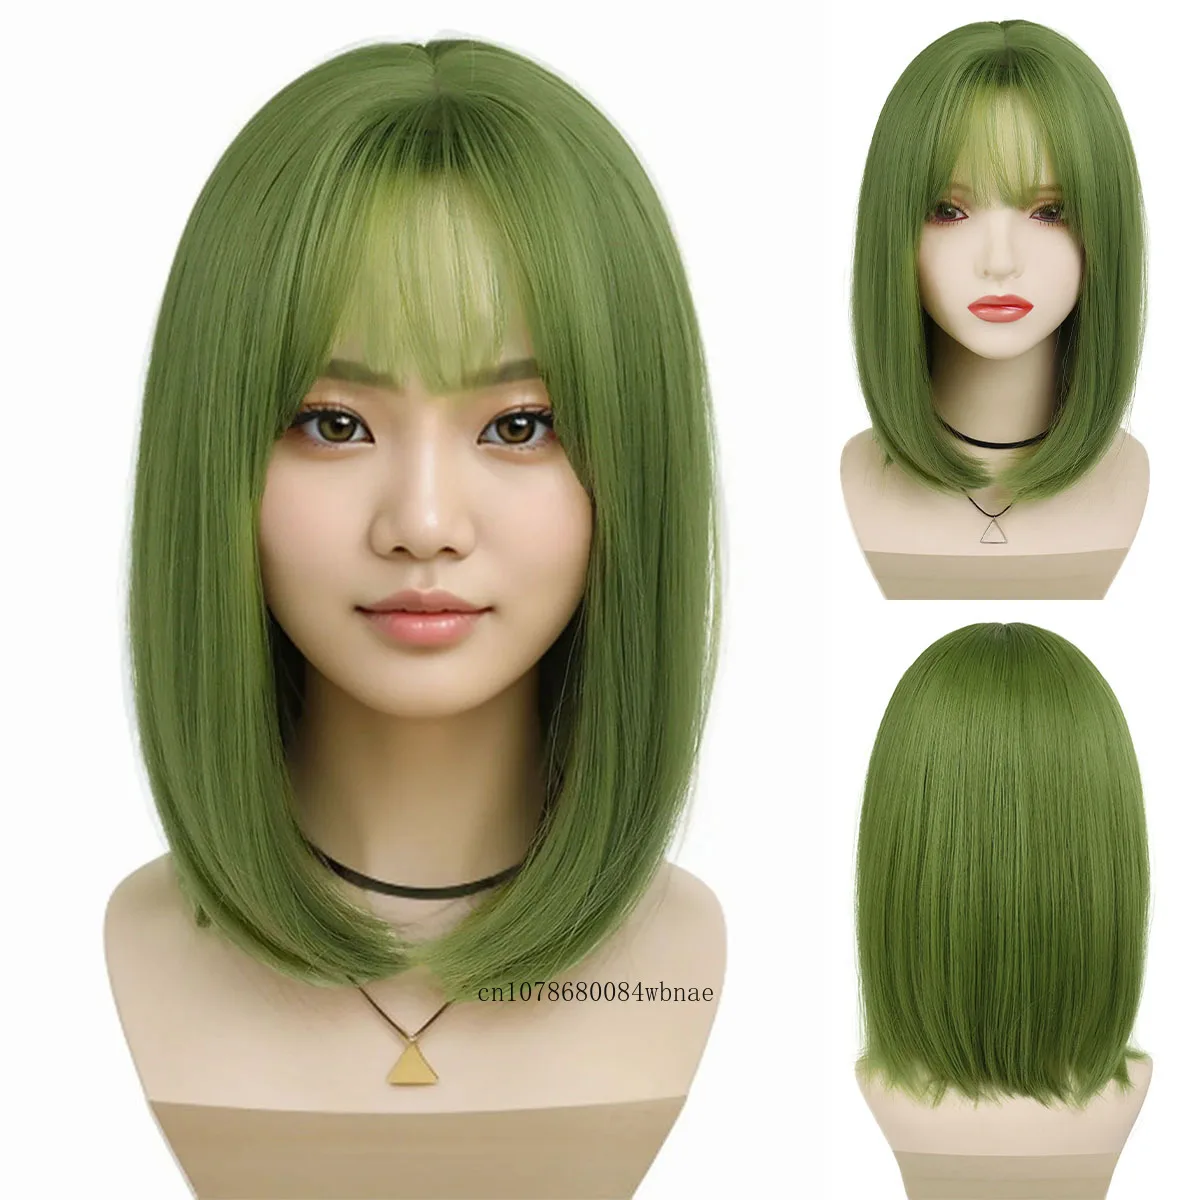 

Synthetic Short Straight Green Wigs Cute Bob Cosplay Wig with Bangs for Women Girls Heat Resistant Costume Party Halloween Use